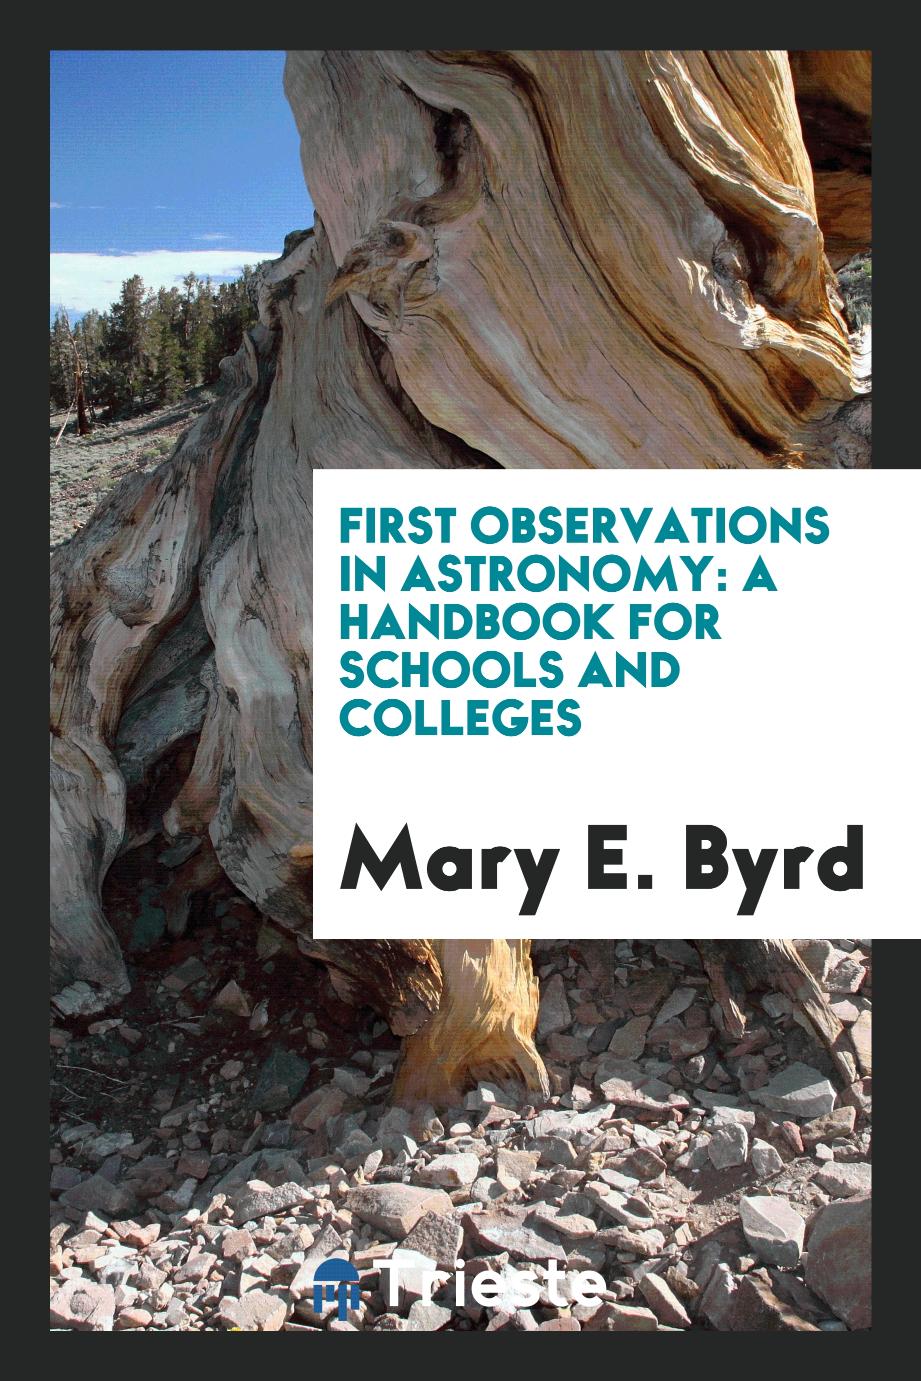 First Observations in Astronomy: A Handbook for Schools and Colleges